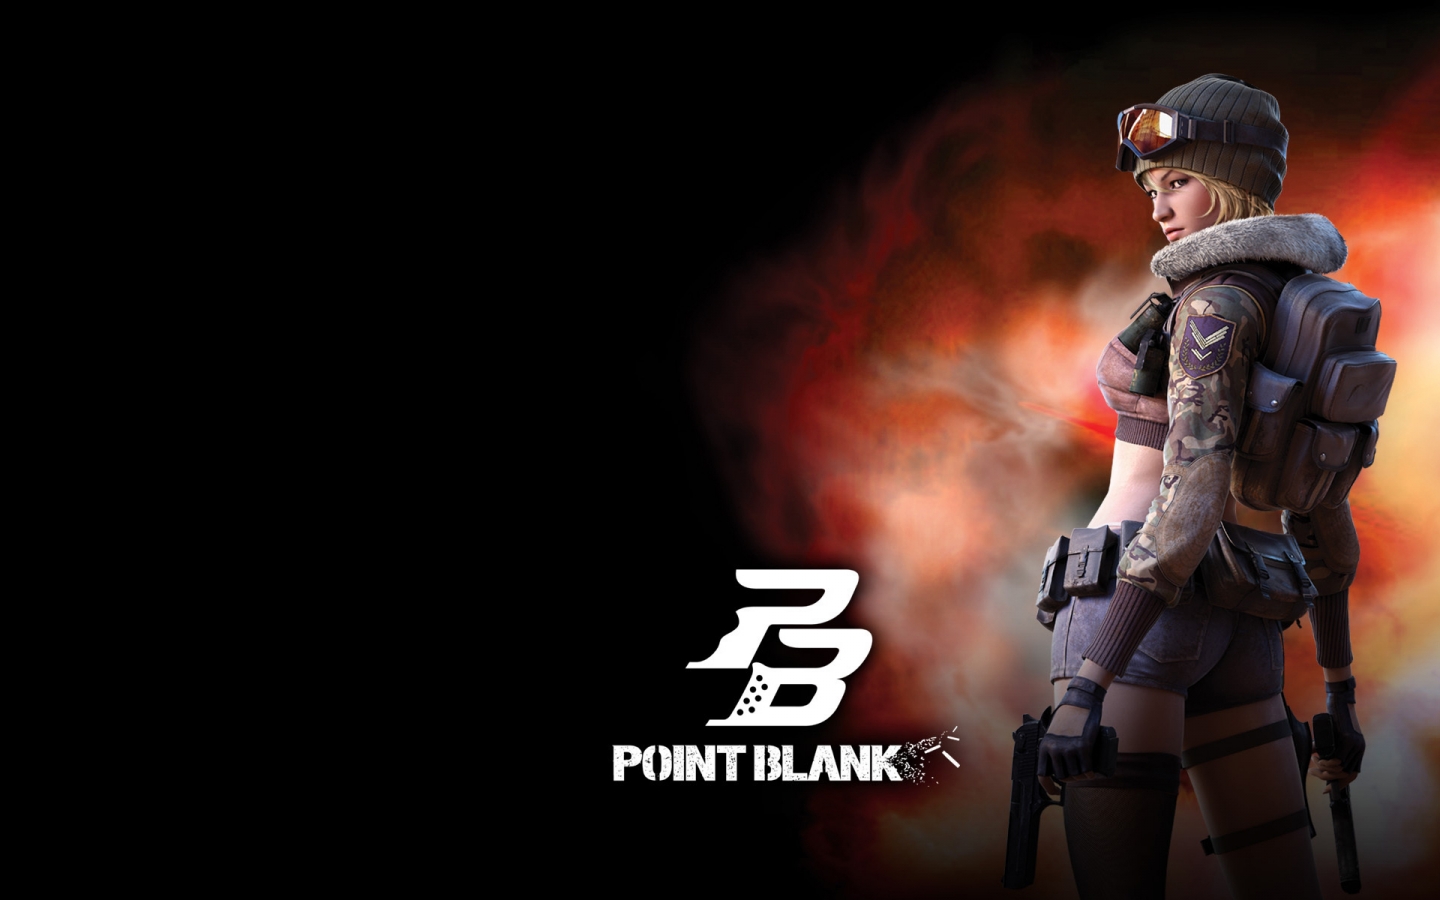 Point Blank Poster for 1440 x 900 widescreen resolution